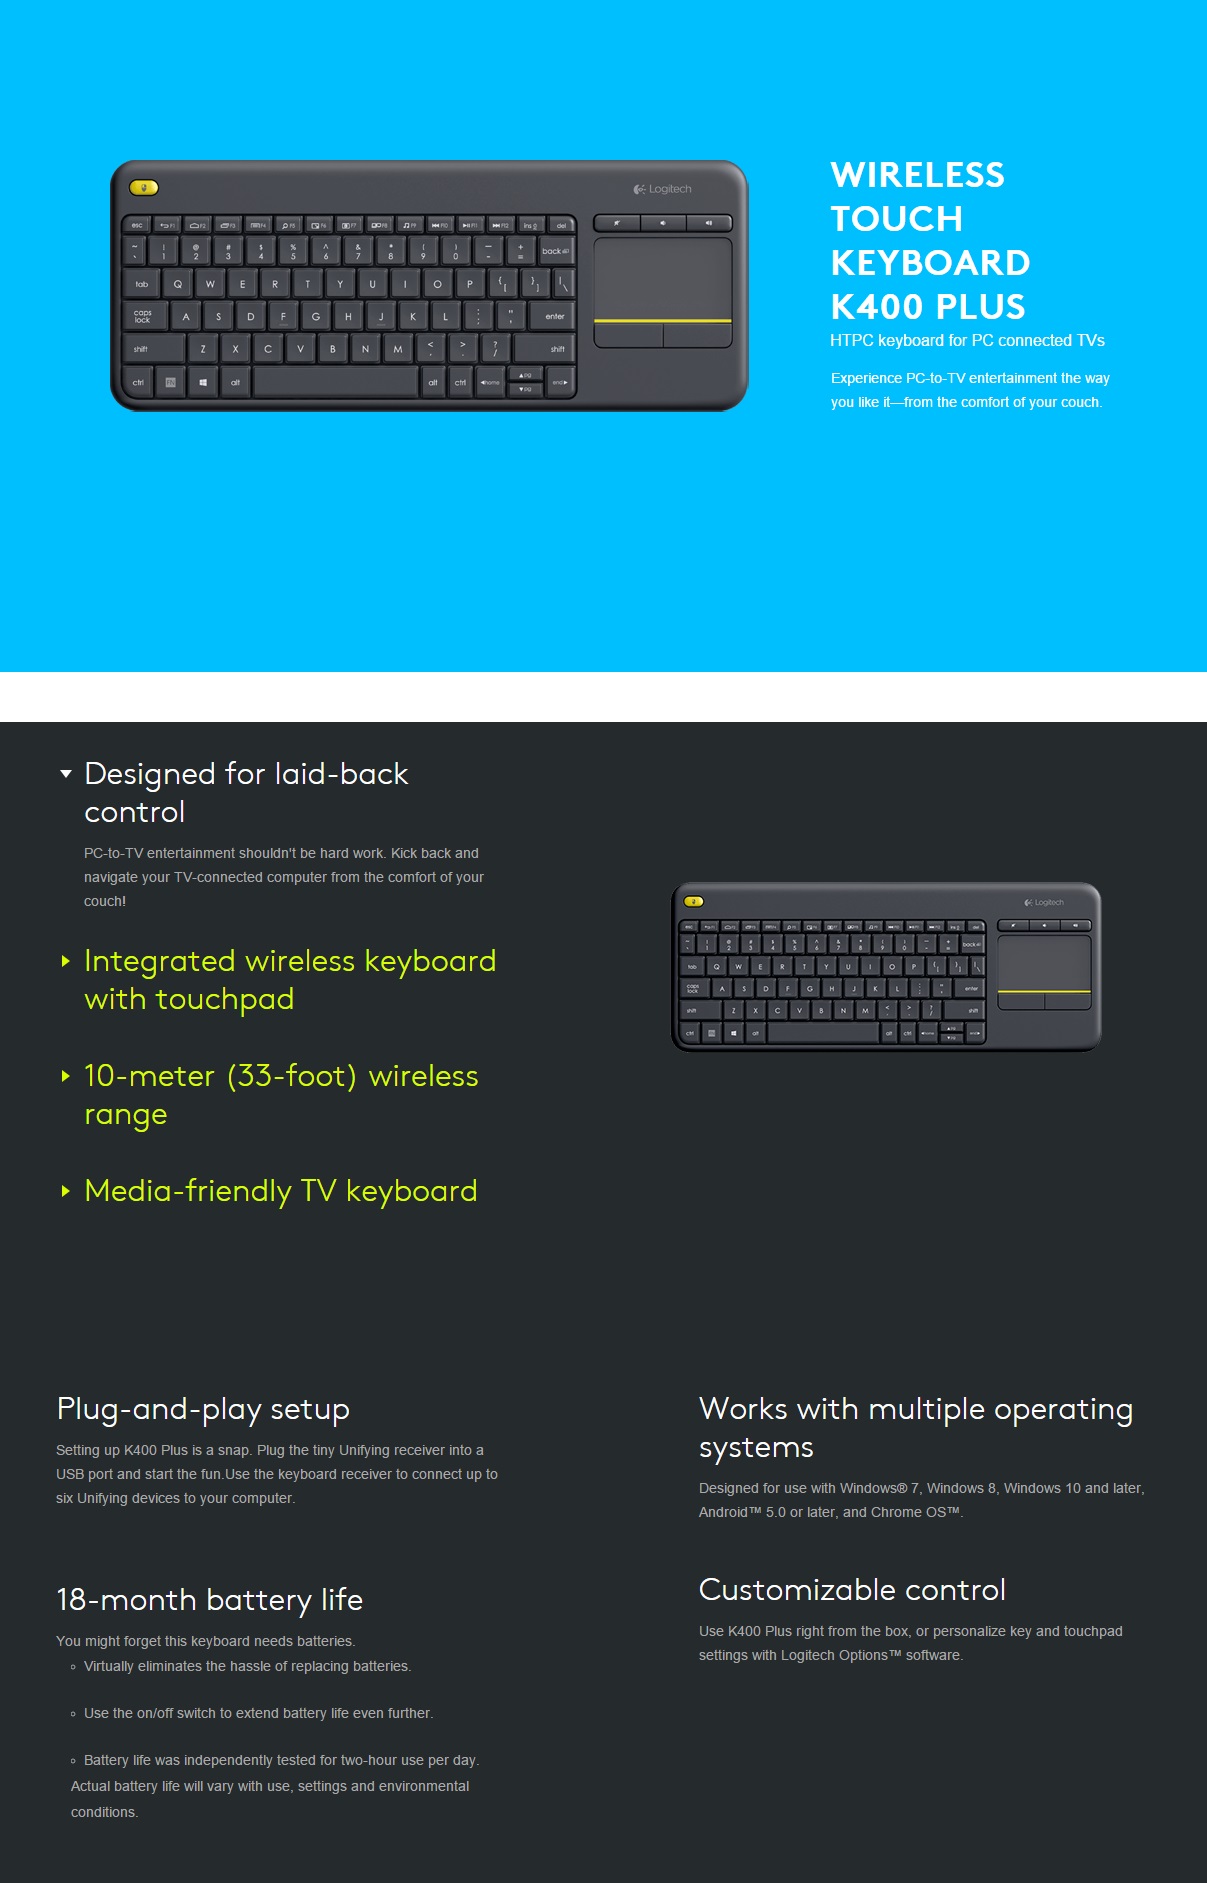 A large marketing image providing additional information about the product Logitech K400 Plus Wireless Touch Keyboard - Additional alt info not provided